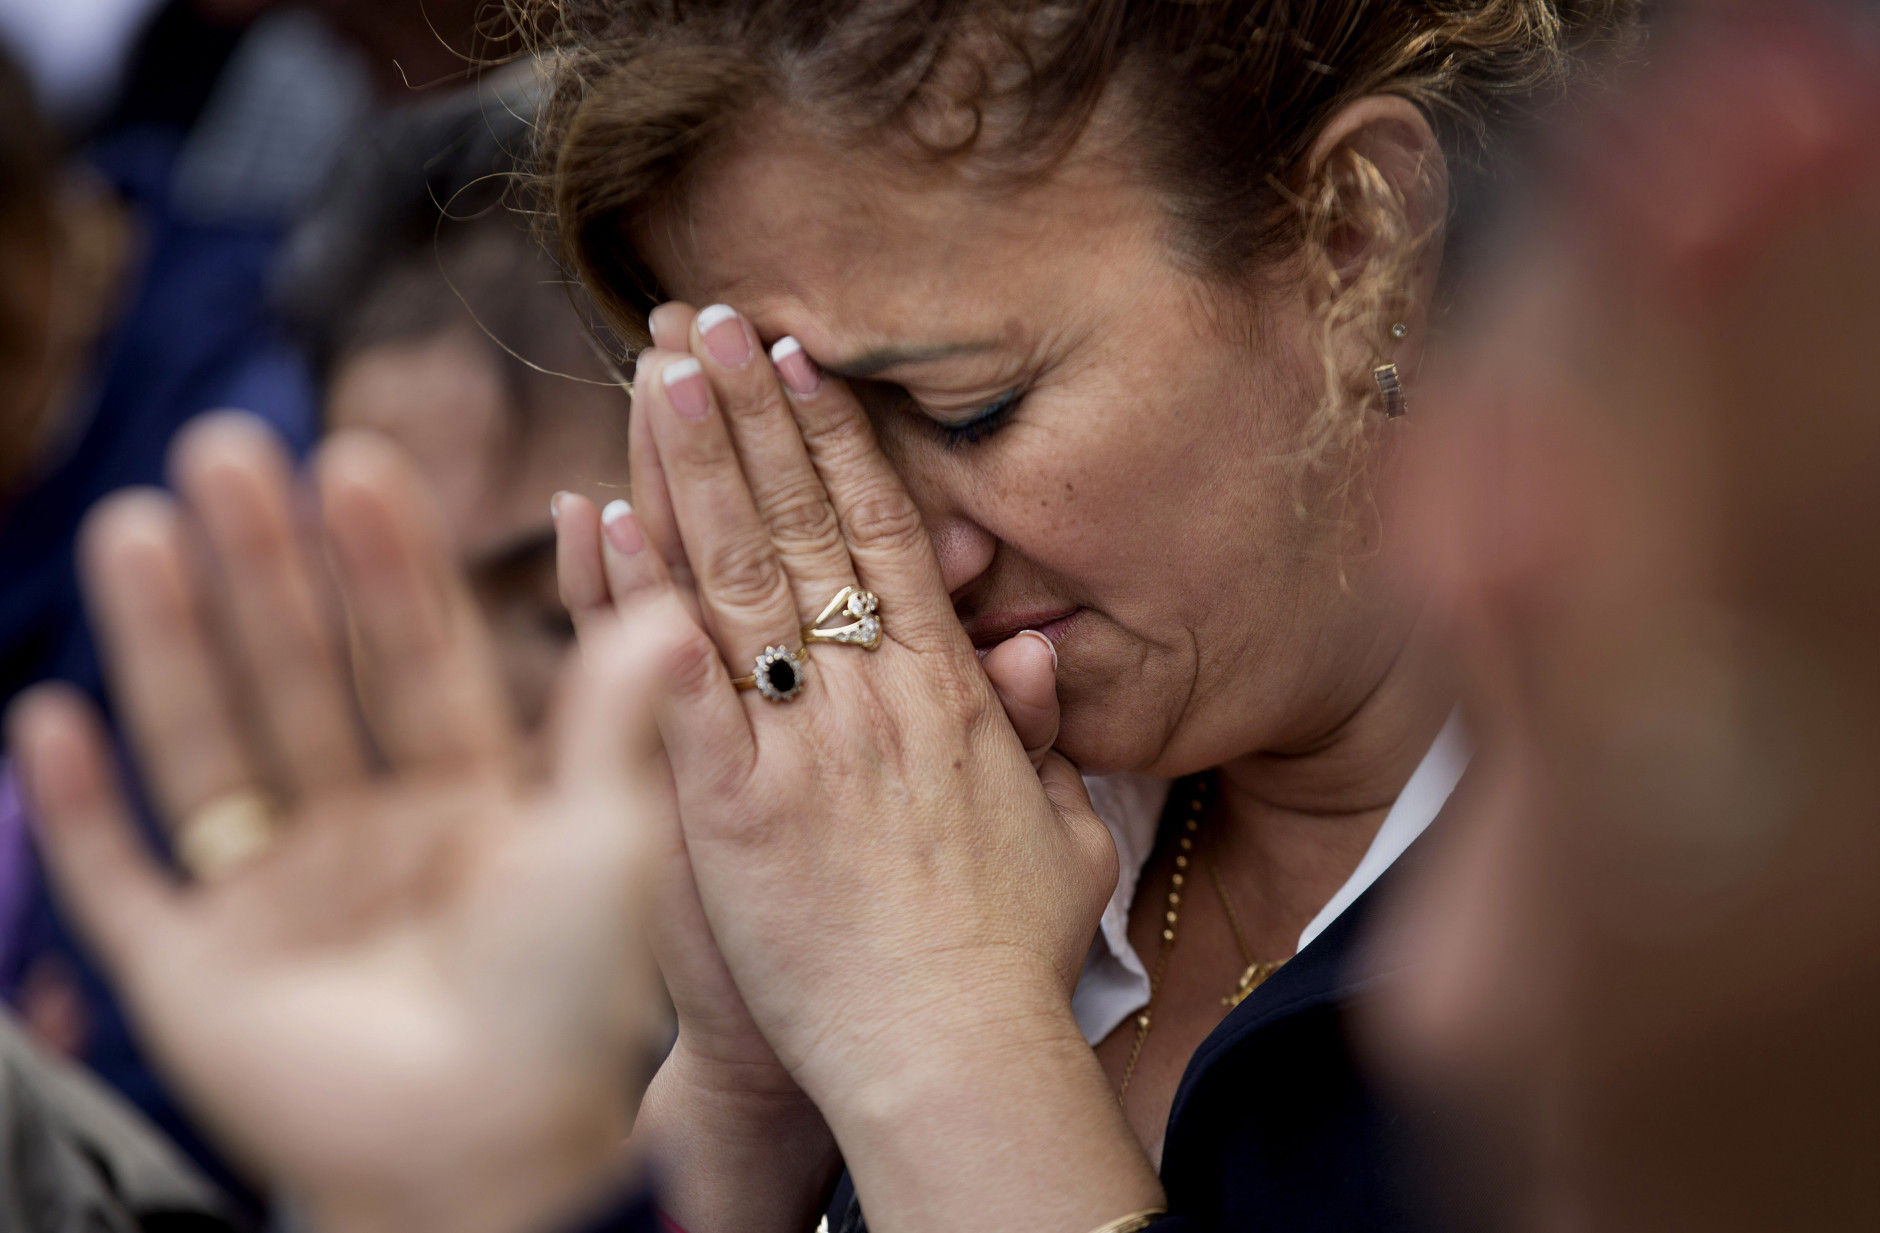 Pilar Cedeno, of Hackensack, N.J., prays as Mass conducted by Pope Francis is broadcast to crowds on the Benjamin Franklin Parkway from inside the Cathedral Basilica of Saints Peter and Paul Saturday, Sept. 26, 2015, in Philadelphia. (AP Photo/David Goldman)